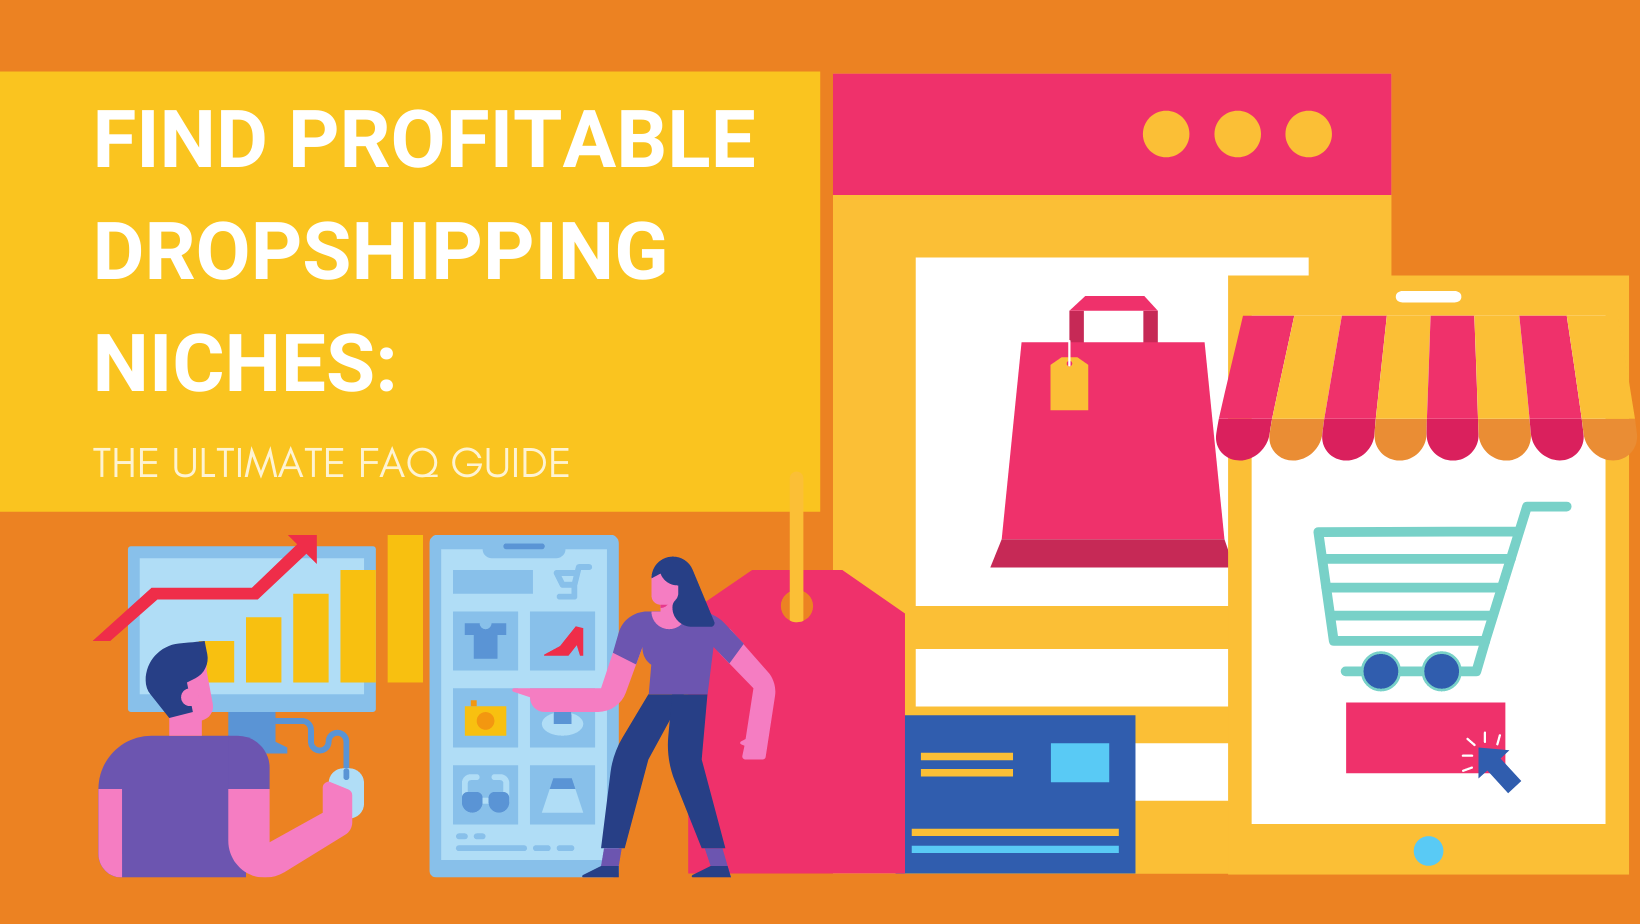 Find-Profitable-Dropshipping-Niches-The-Ultimate-FAQ-Guide